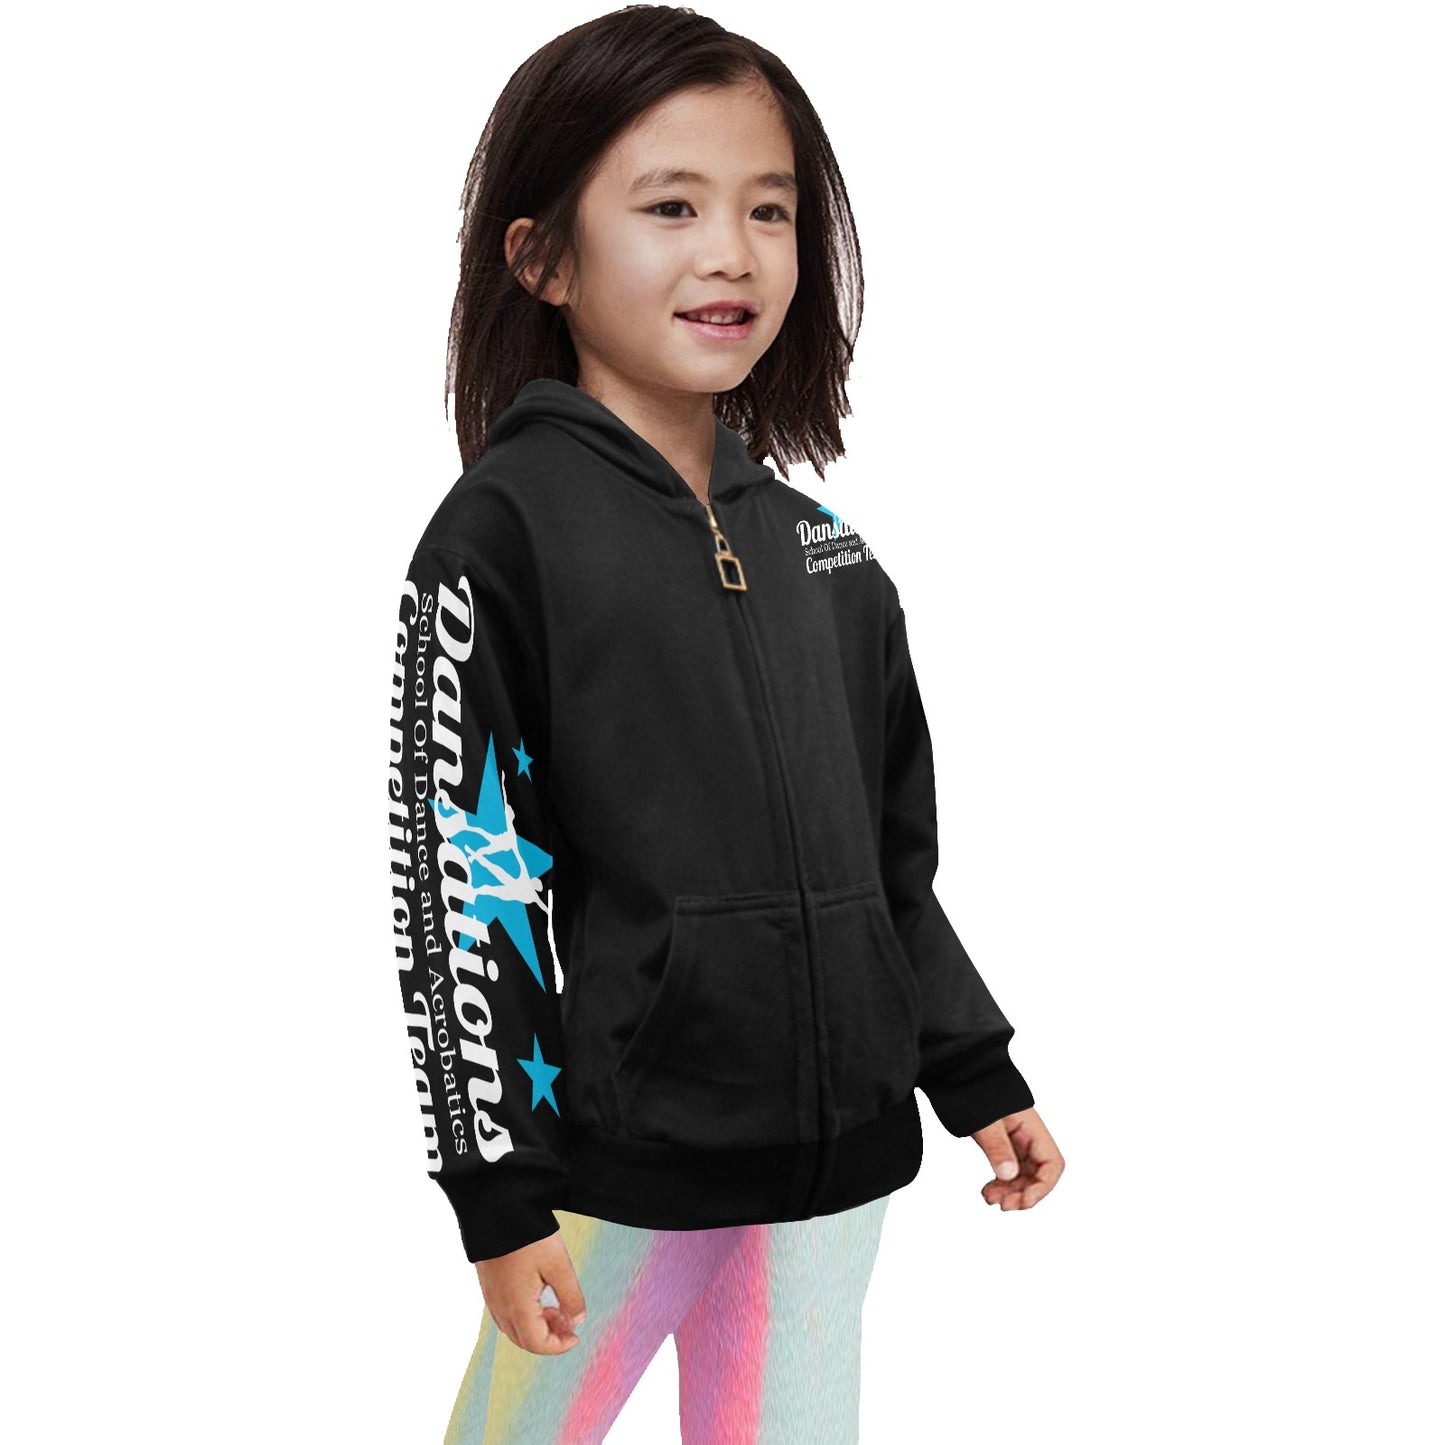 Dansations Competition Team Zip Up Hoodie for Kids